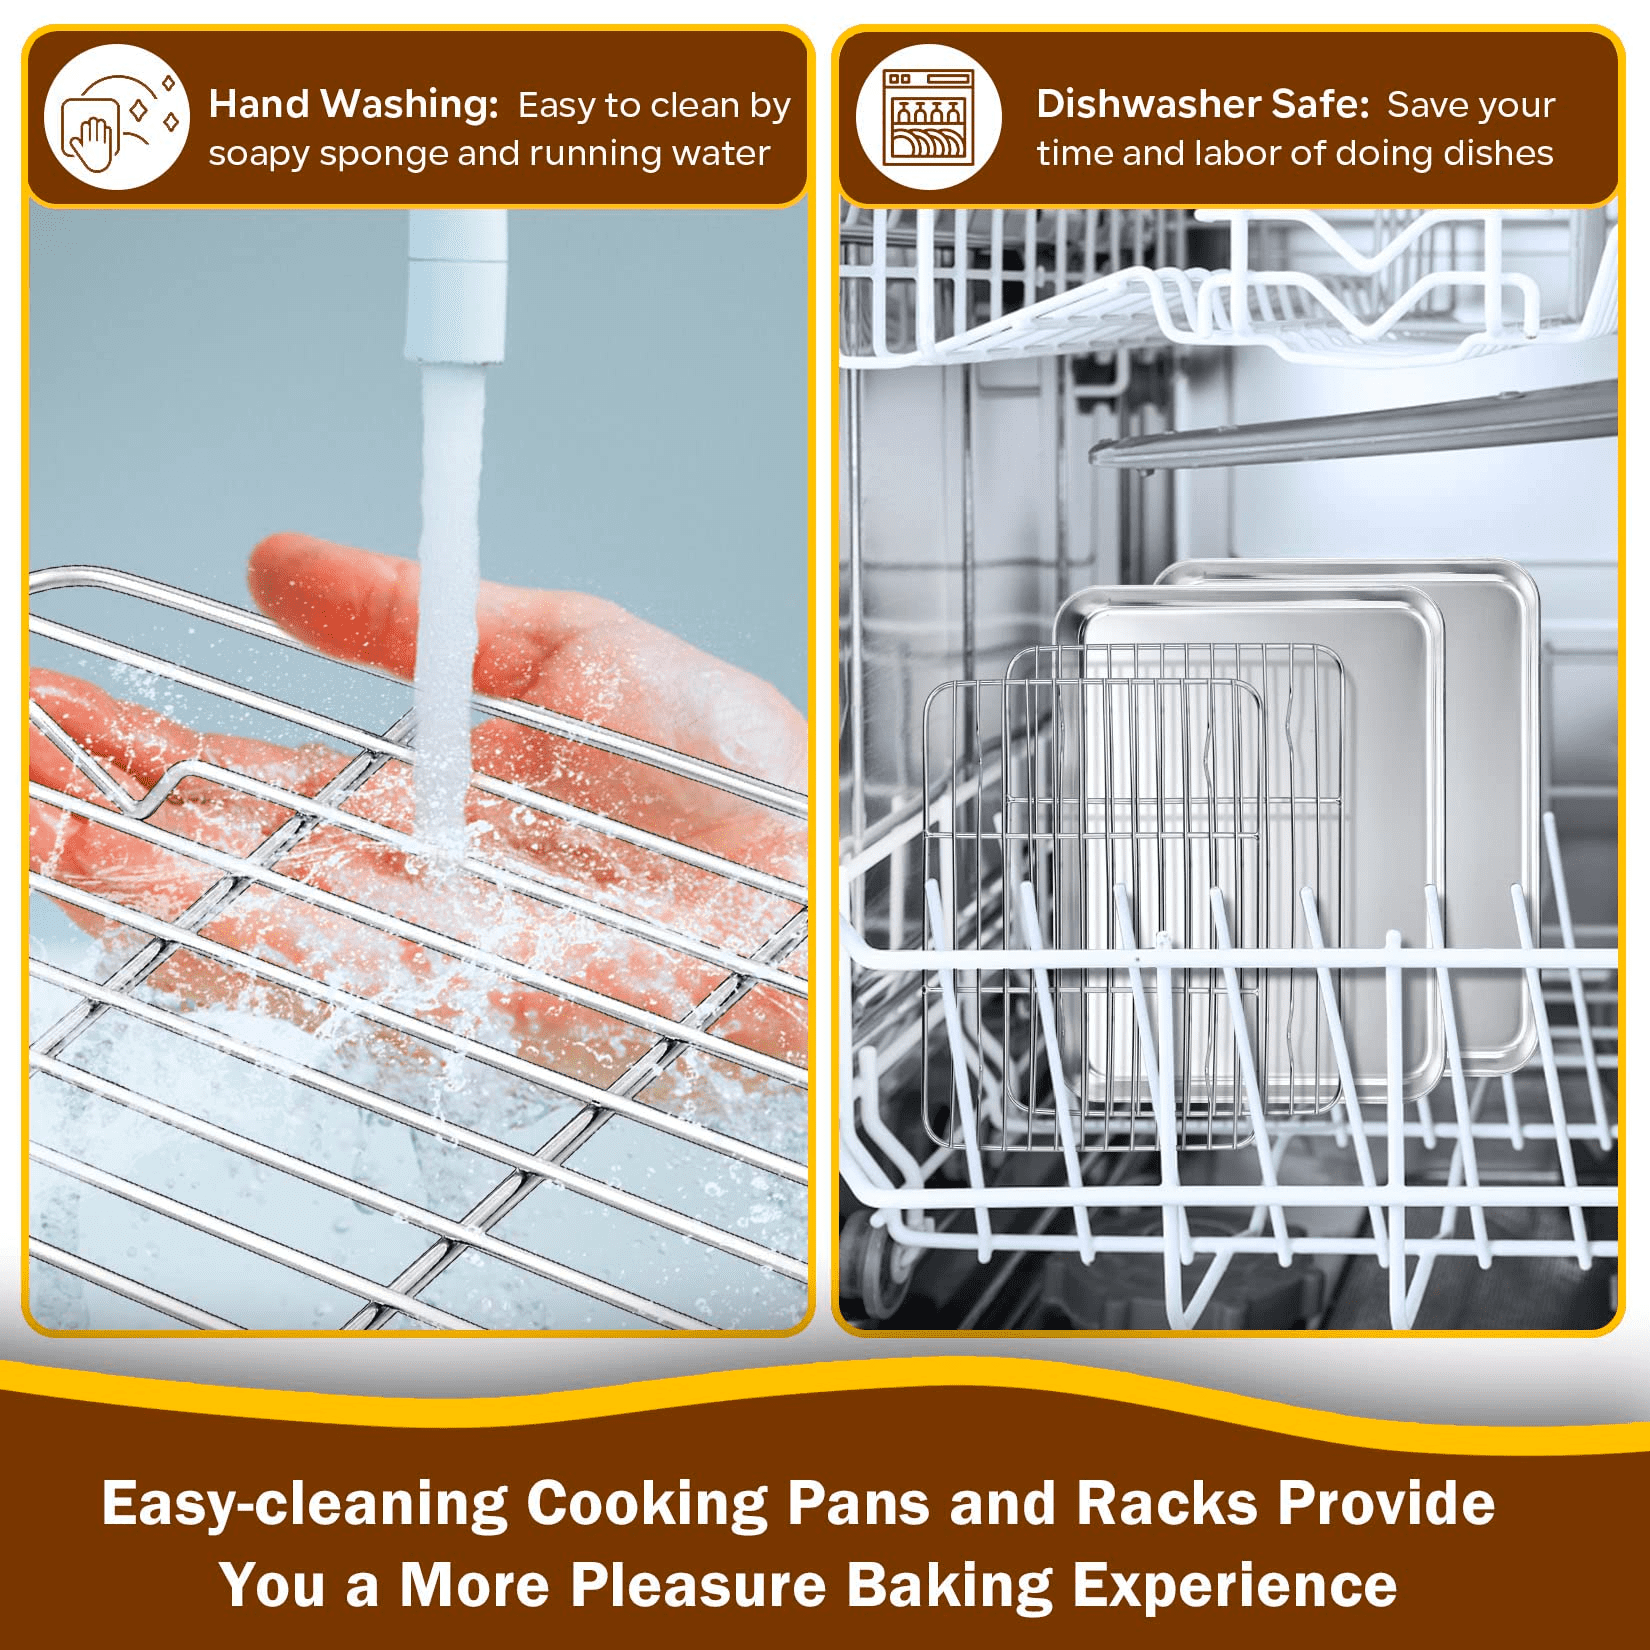 9 Inch Toaster Oven Pan with Rack, P&P CHEF Stainless Steel Baking Pan  Toaster Oven Tray with Cooking Rack, Corrugated Bottom & Grid Mesh Rack,  Oven